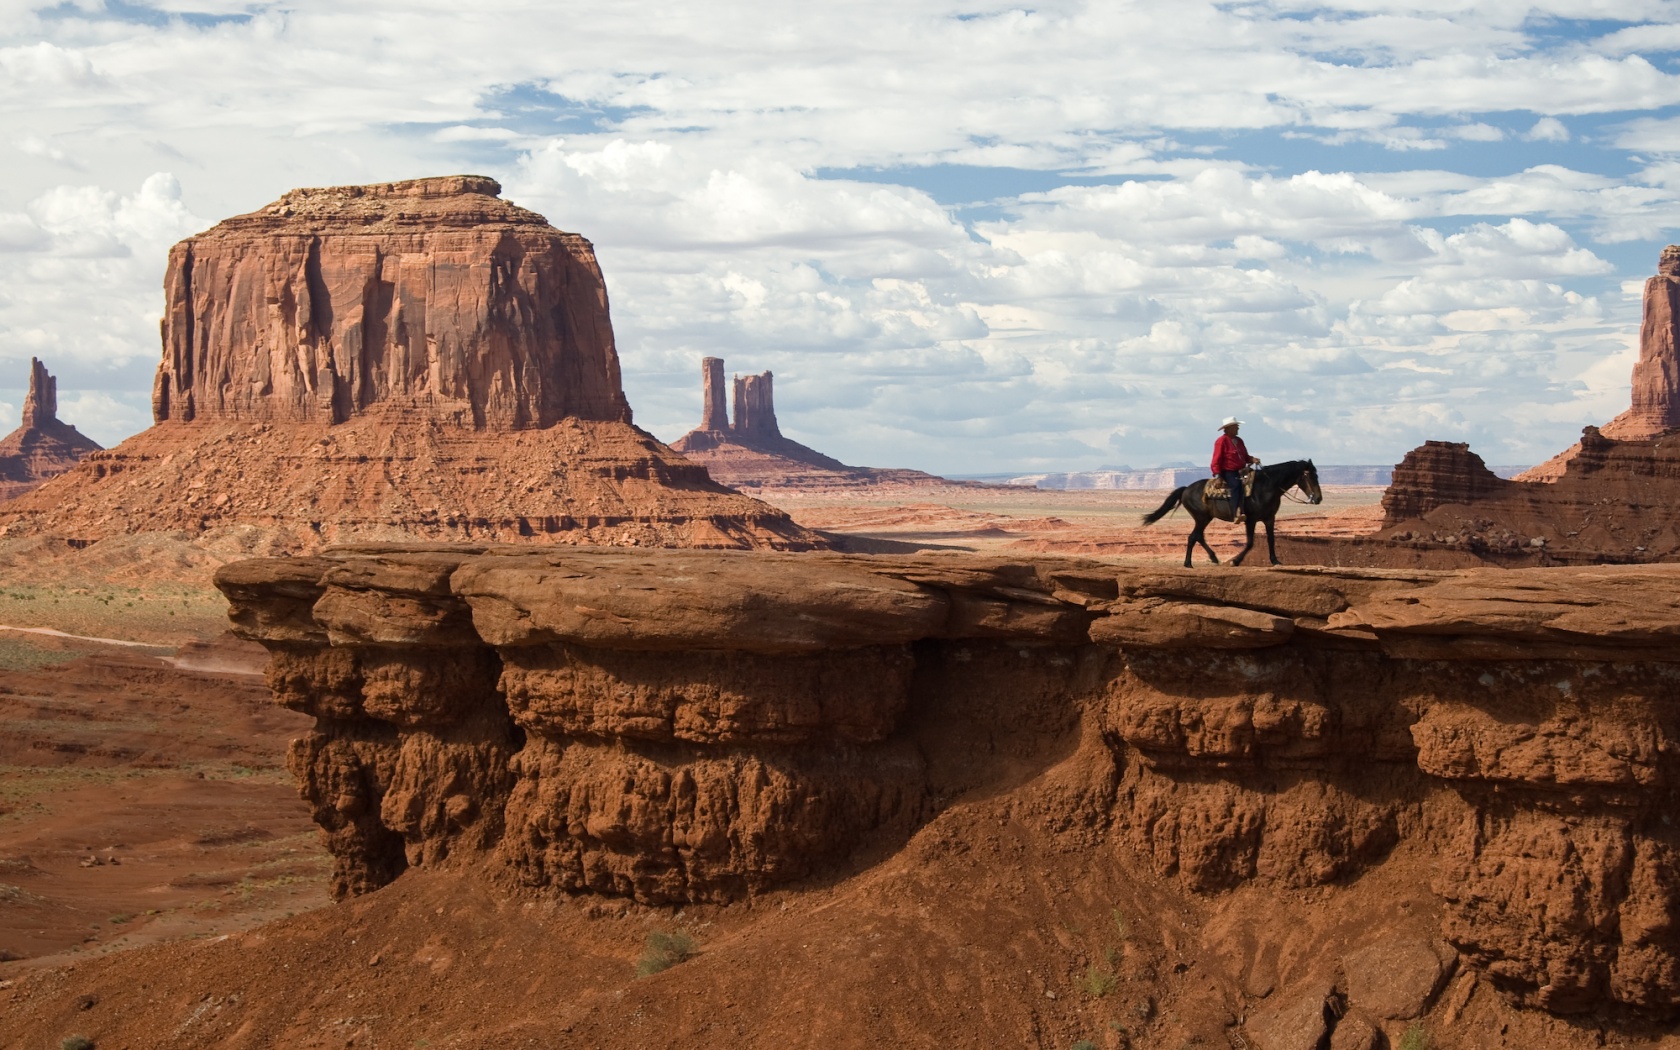 Cowboy in the Arizona desert wallpapers and images - wallpapers